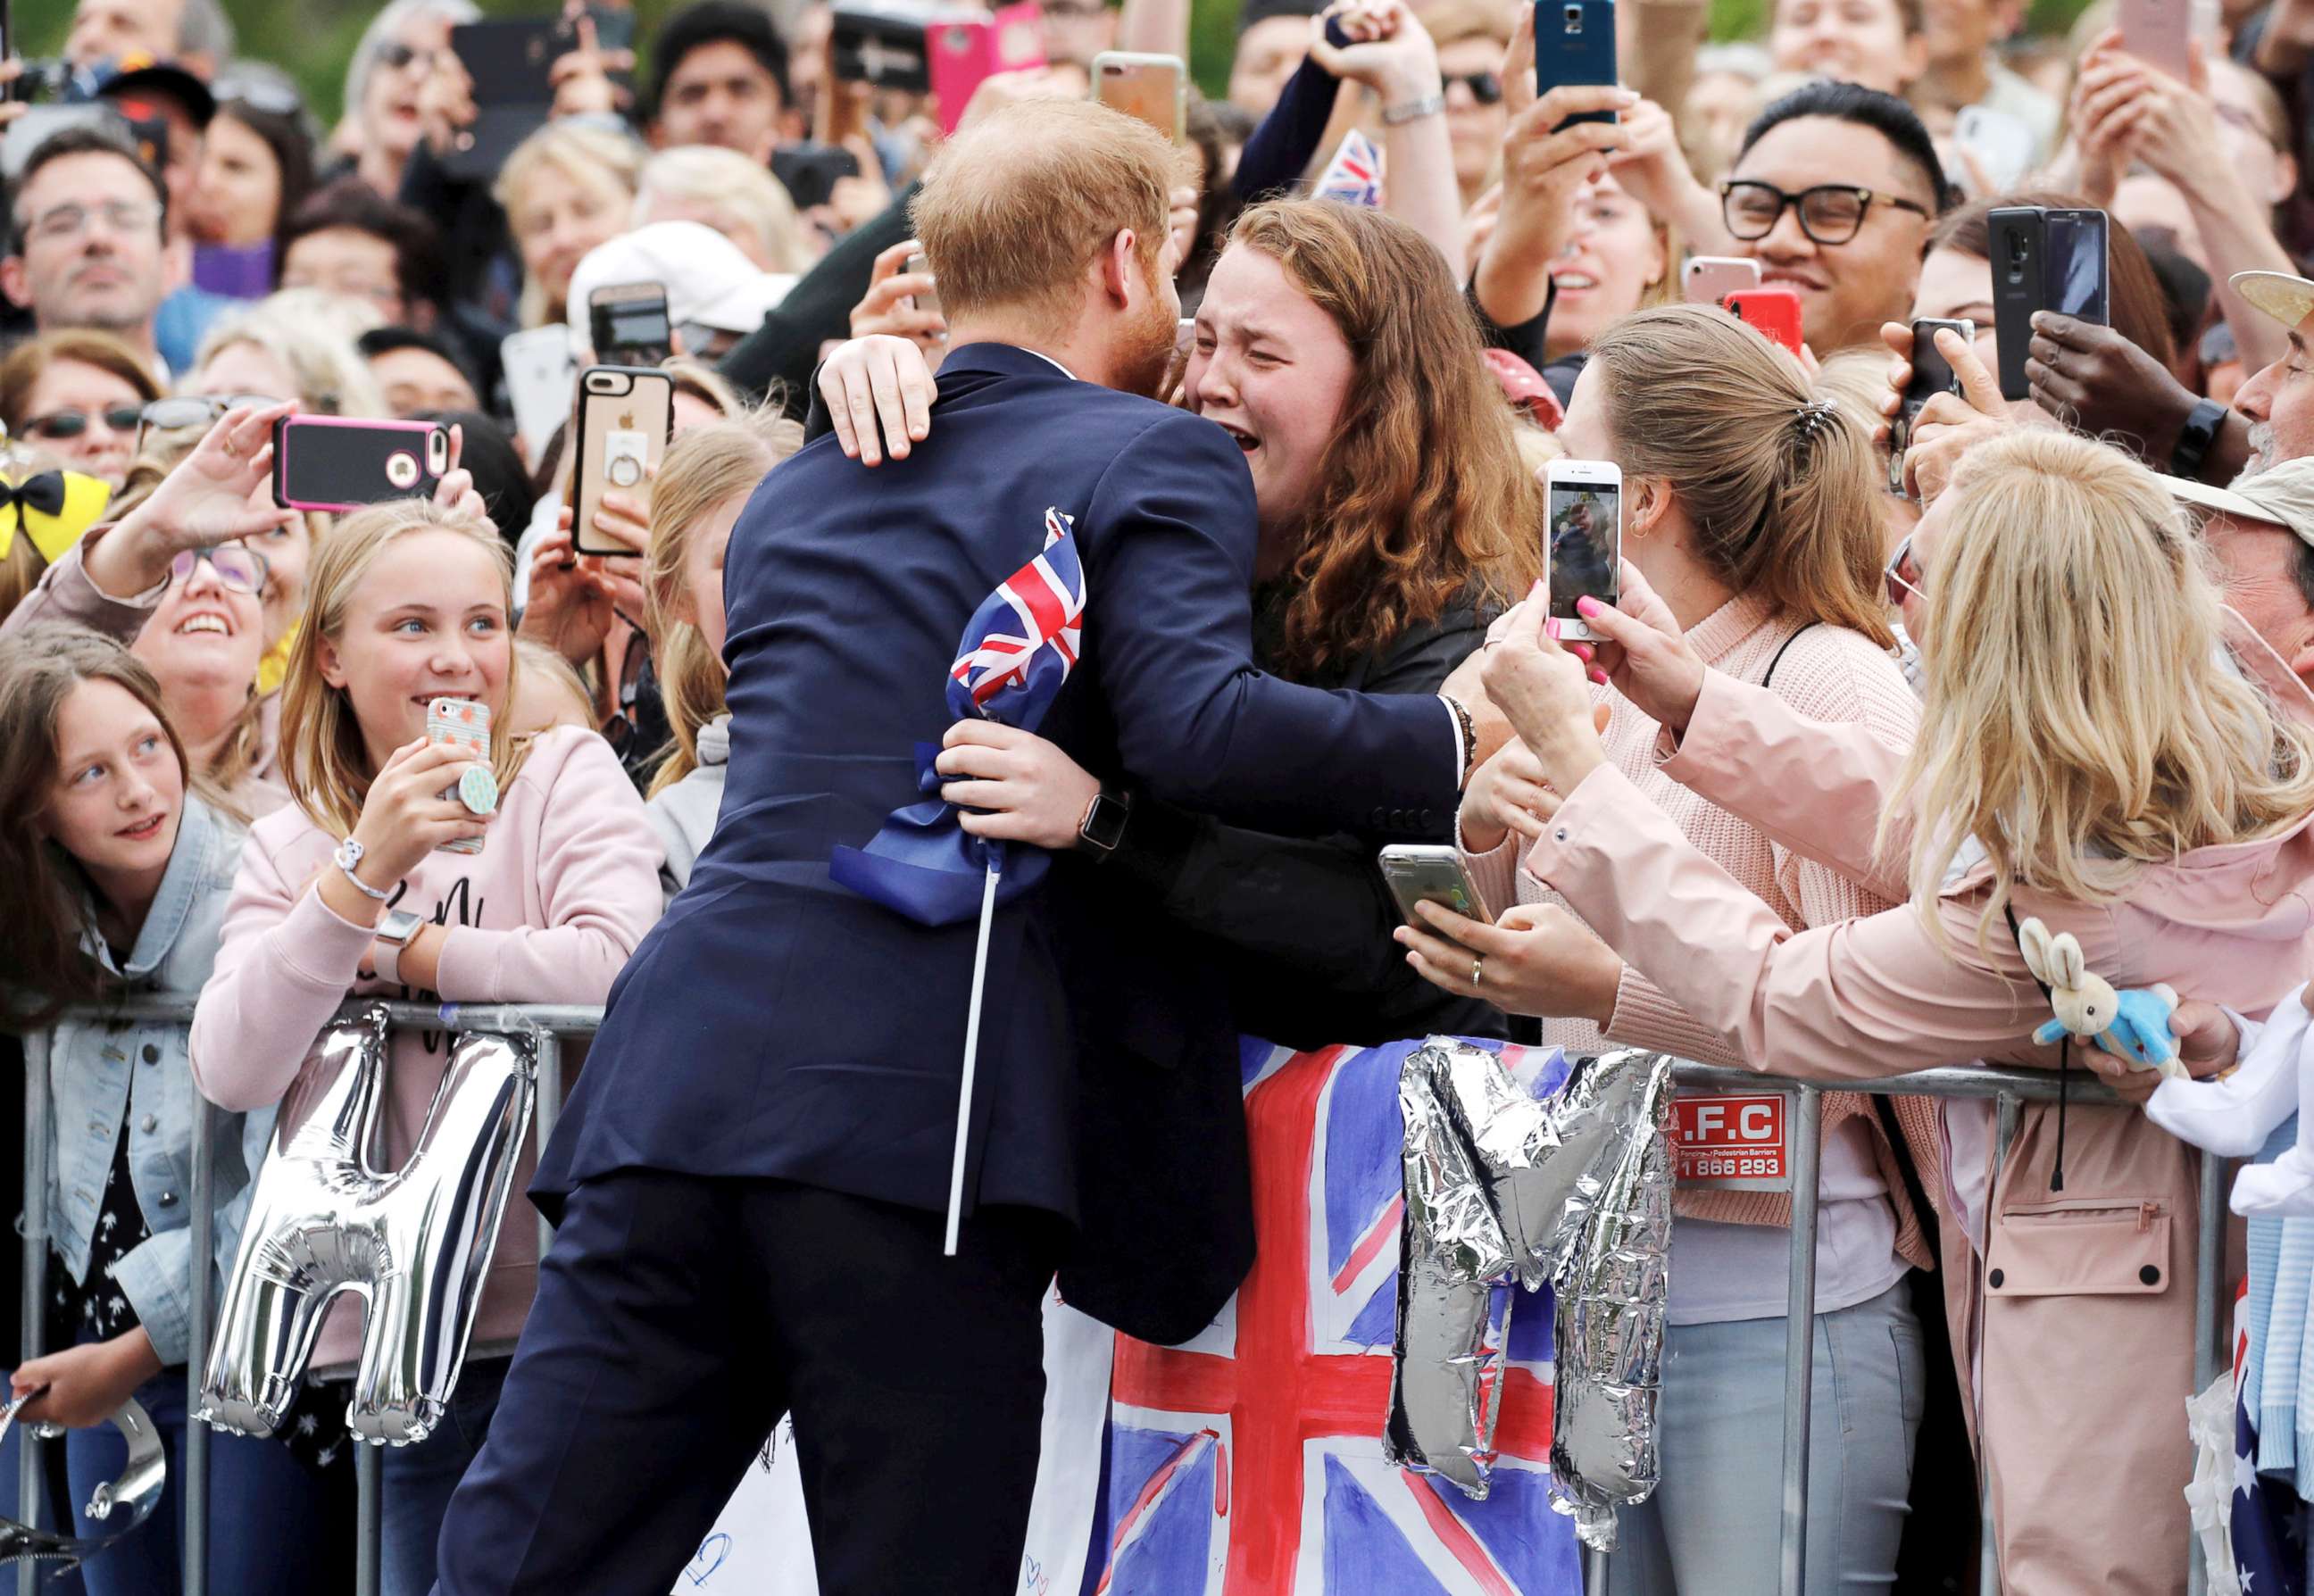 PHOTO: Britain's Prince Harry hugs a member of the public as he arrives at the Royal Botanic Gardens in Melbourne, Australia, Oct. 18, 2018.